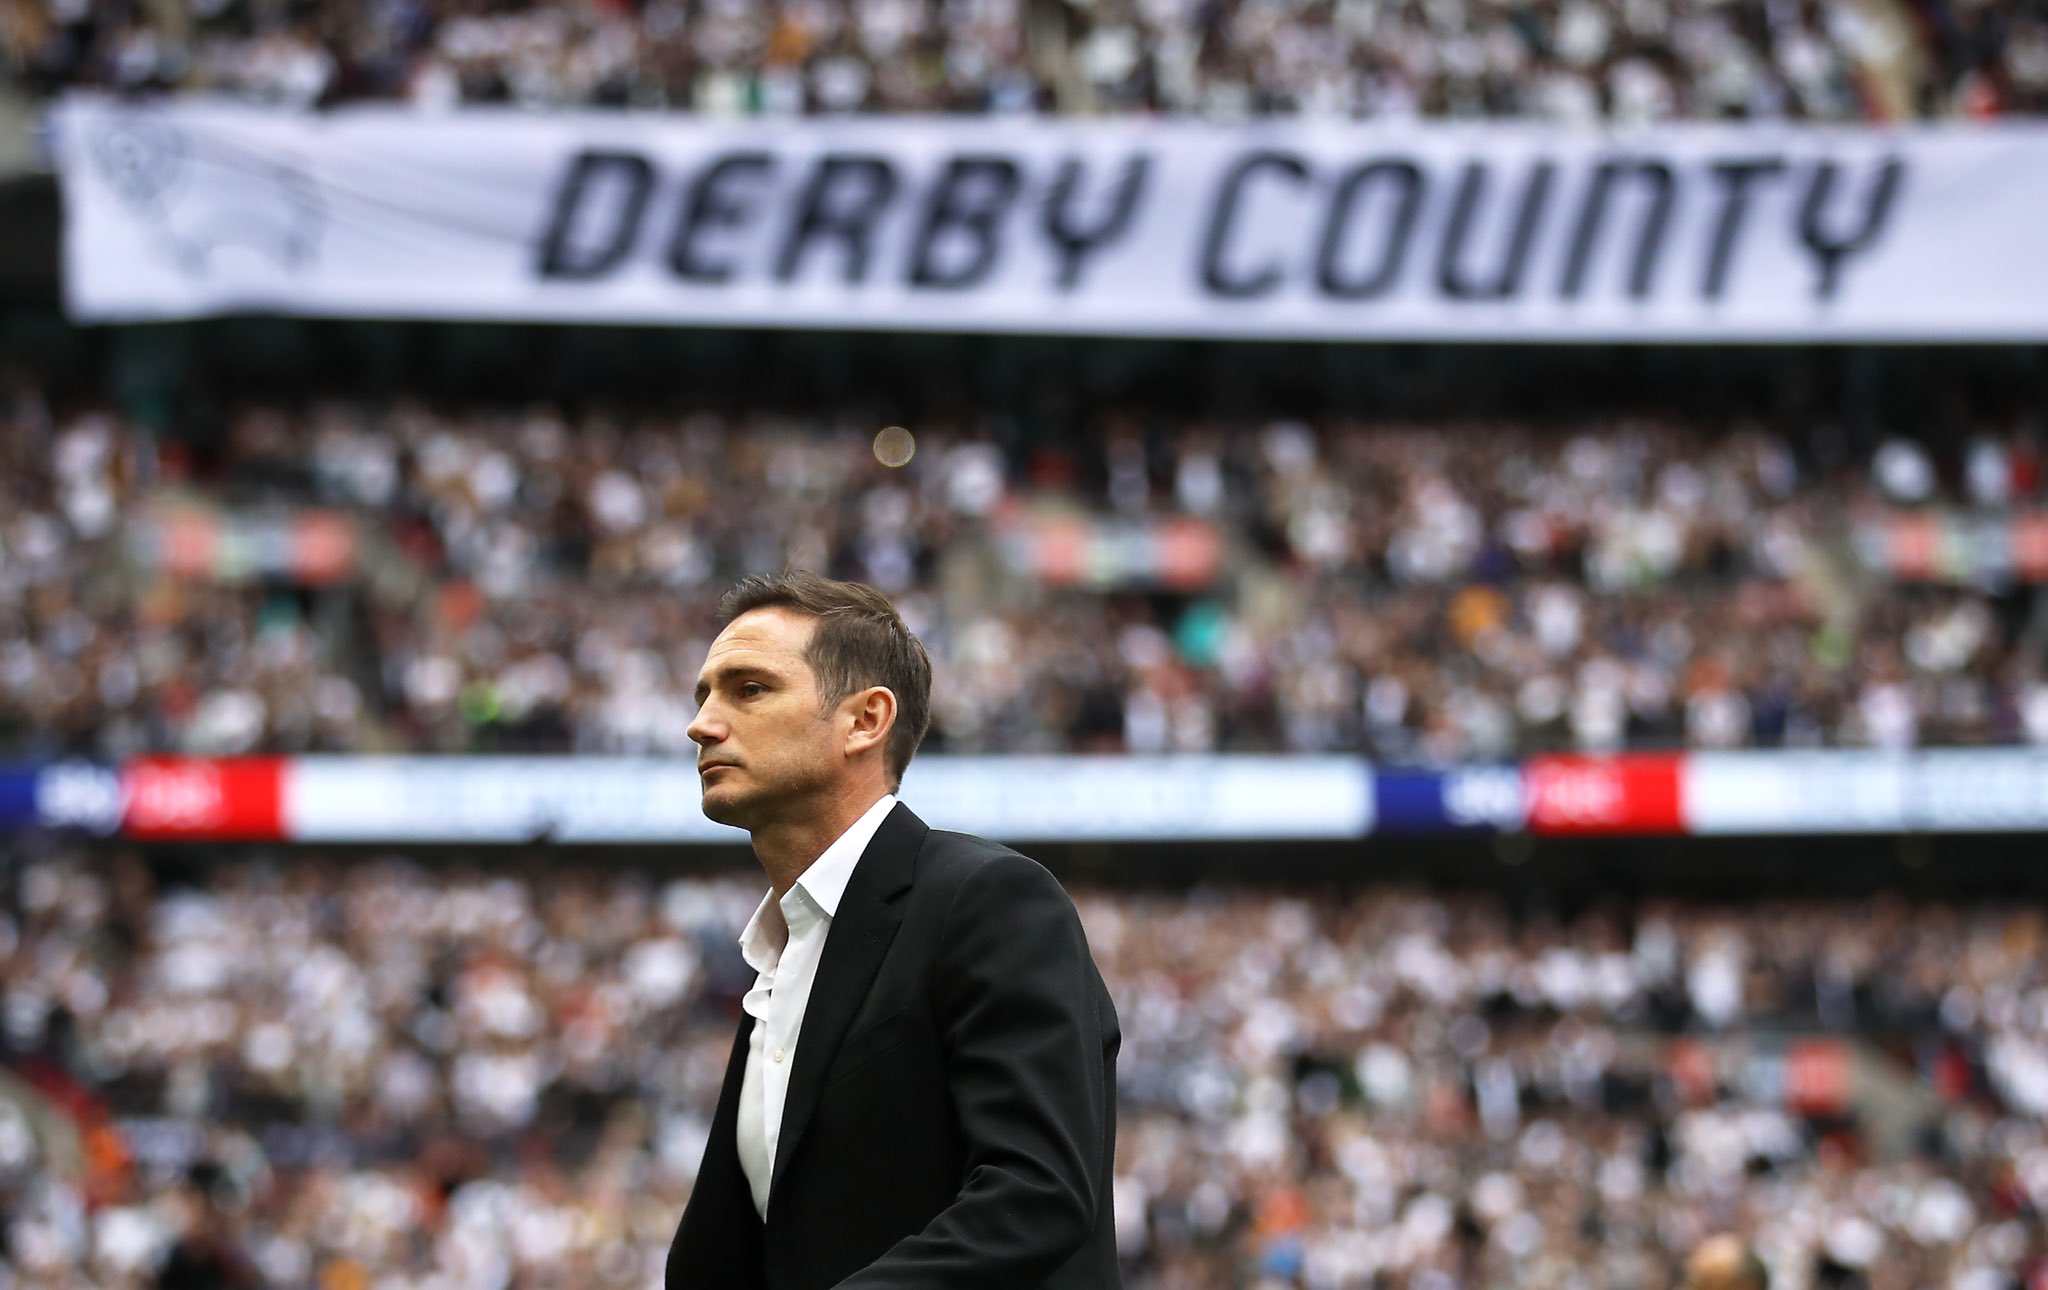 Lampard responds to Chelsea speculation after play-off final loss